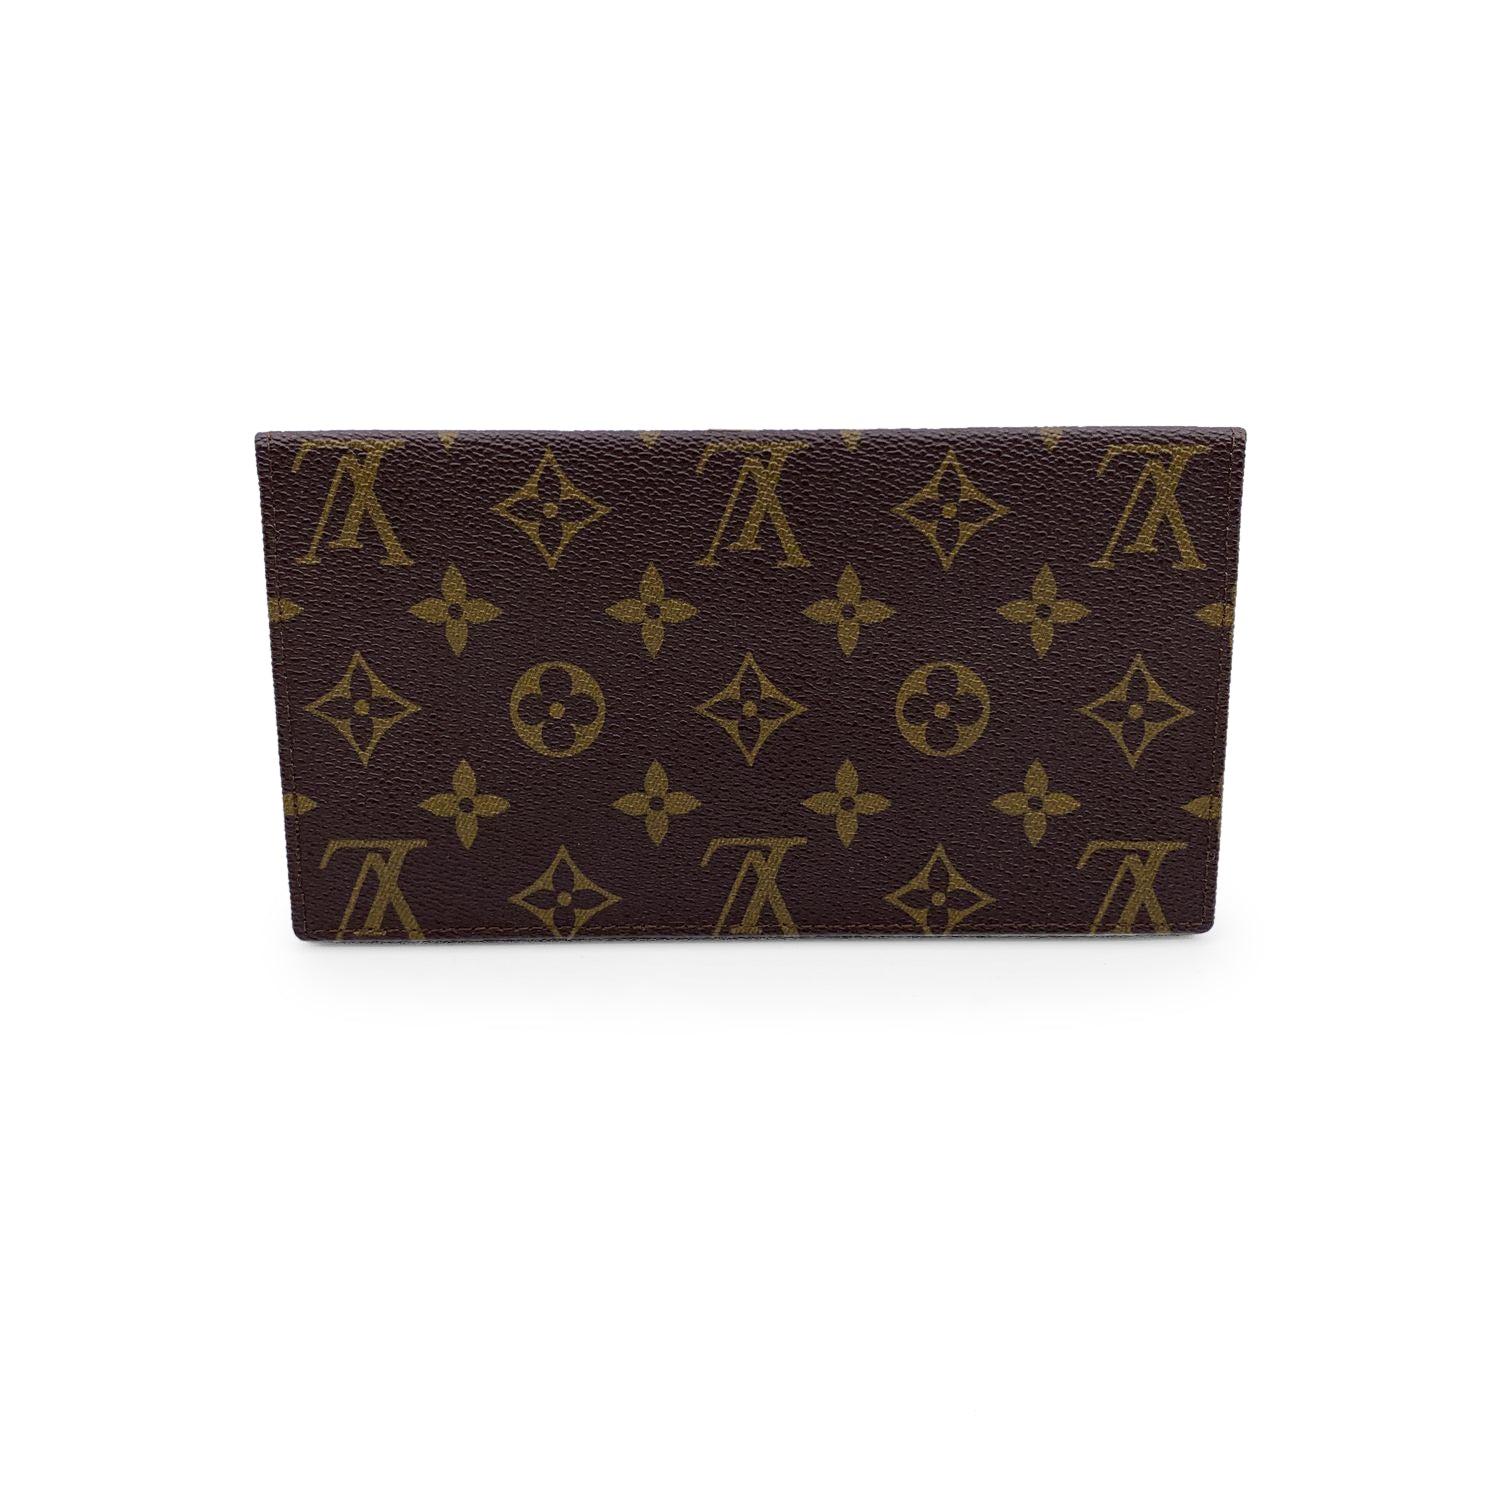 Louis Vuitton Vintage Monogram Canvas Porte Chequier Checkbook holder. Monogram canvas and brown leather inside. 2 open pockets and 1 checkbook slot inside . 'LOUIS VUITTON Paris - made in France' embossed inside. Authenticity serial number engraved